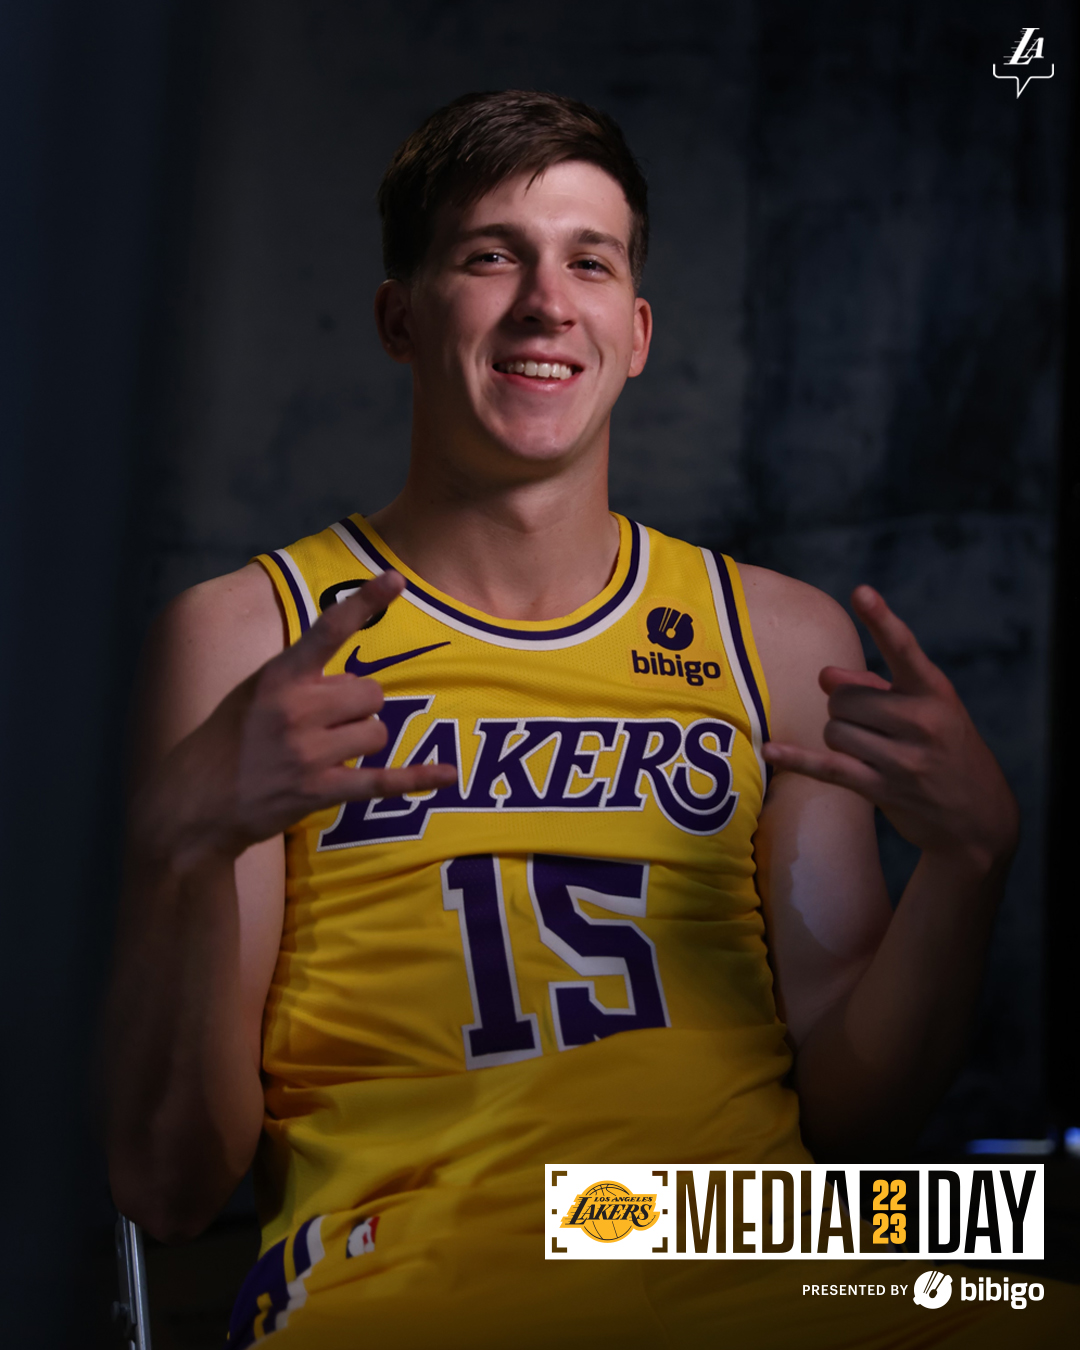 lakers shared a photo on Instagram: “😎🤙” • Jan 23, 2022 at 9:11pm UTC